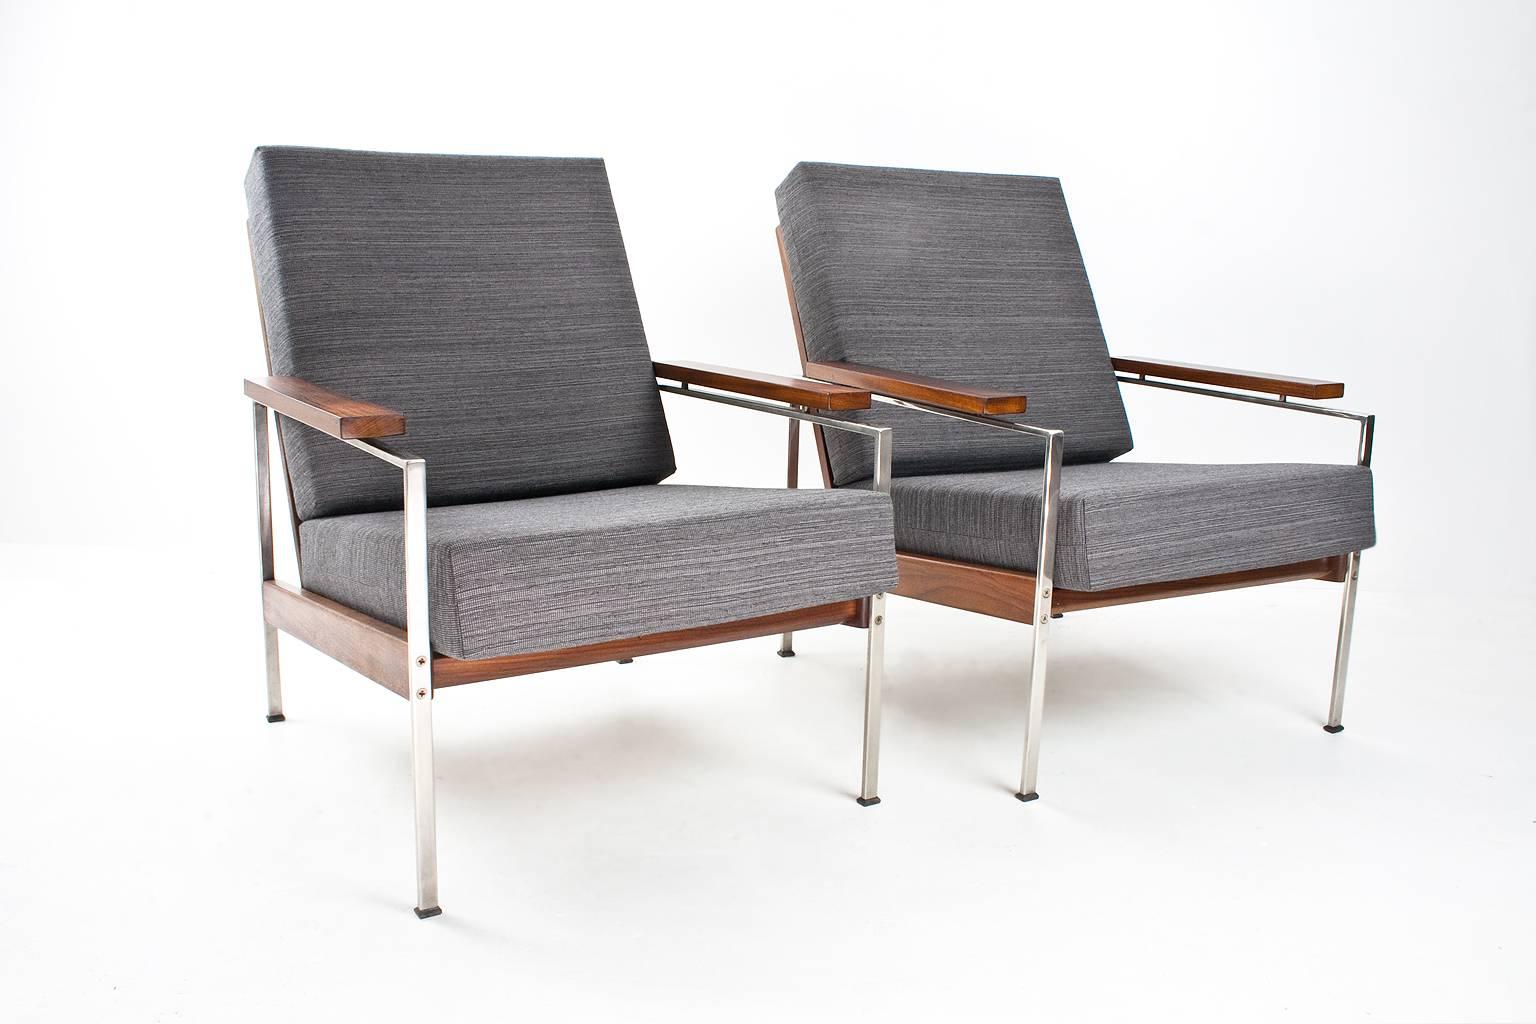 Original and unique Robert (Rob) Parry lounge chairs with loss new upholstered cushions in a metal and wooden frame. Designed for Dutch furniture company Gelderland (collection 1950s-1960s) in teakwood and chromed metal with new good quality grey